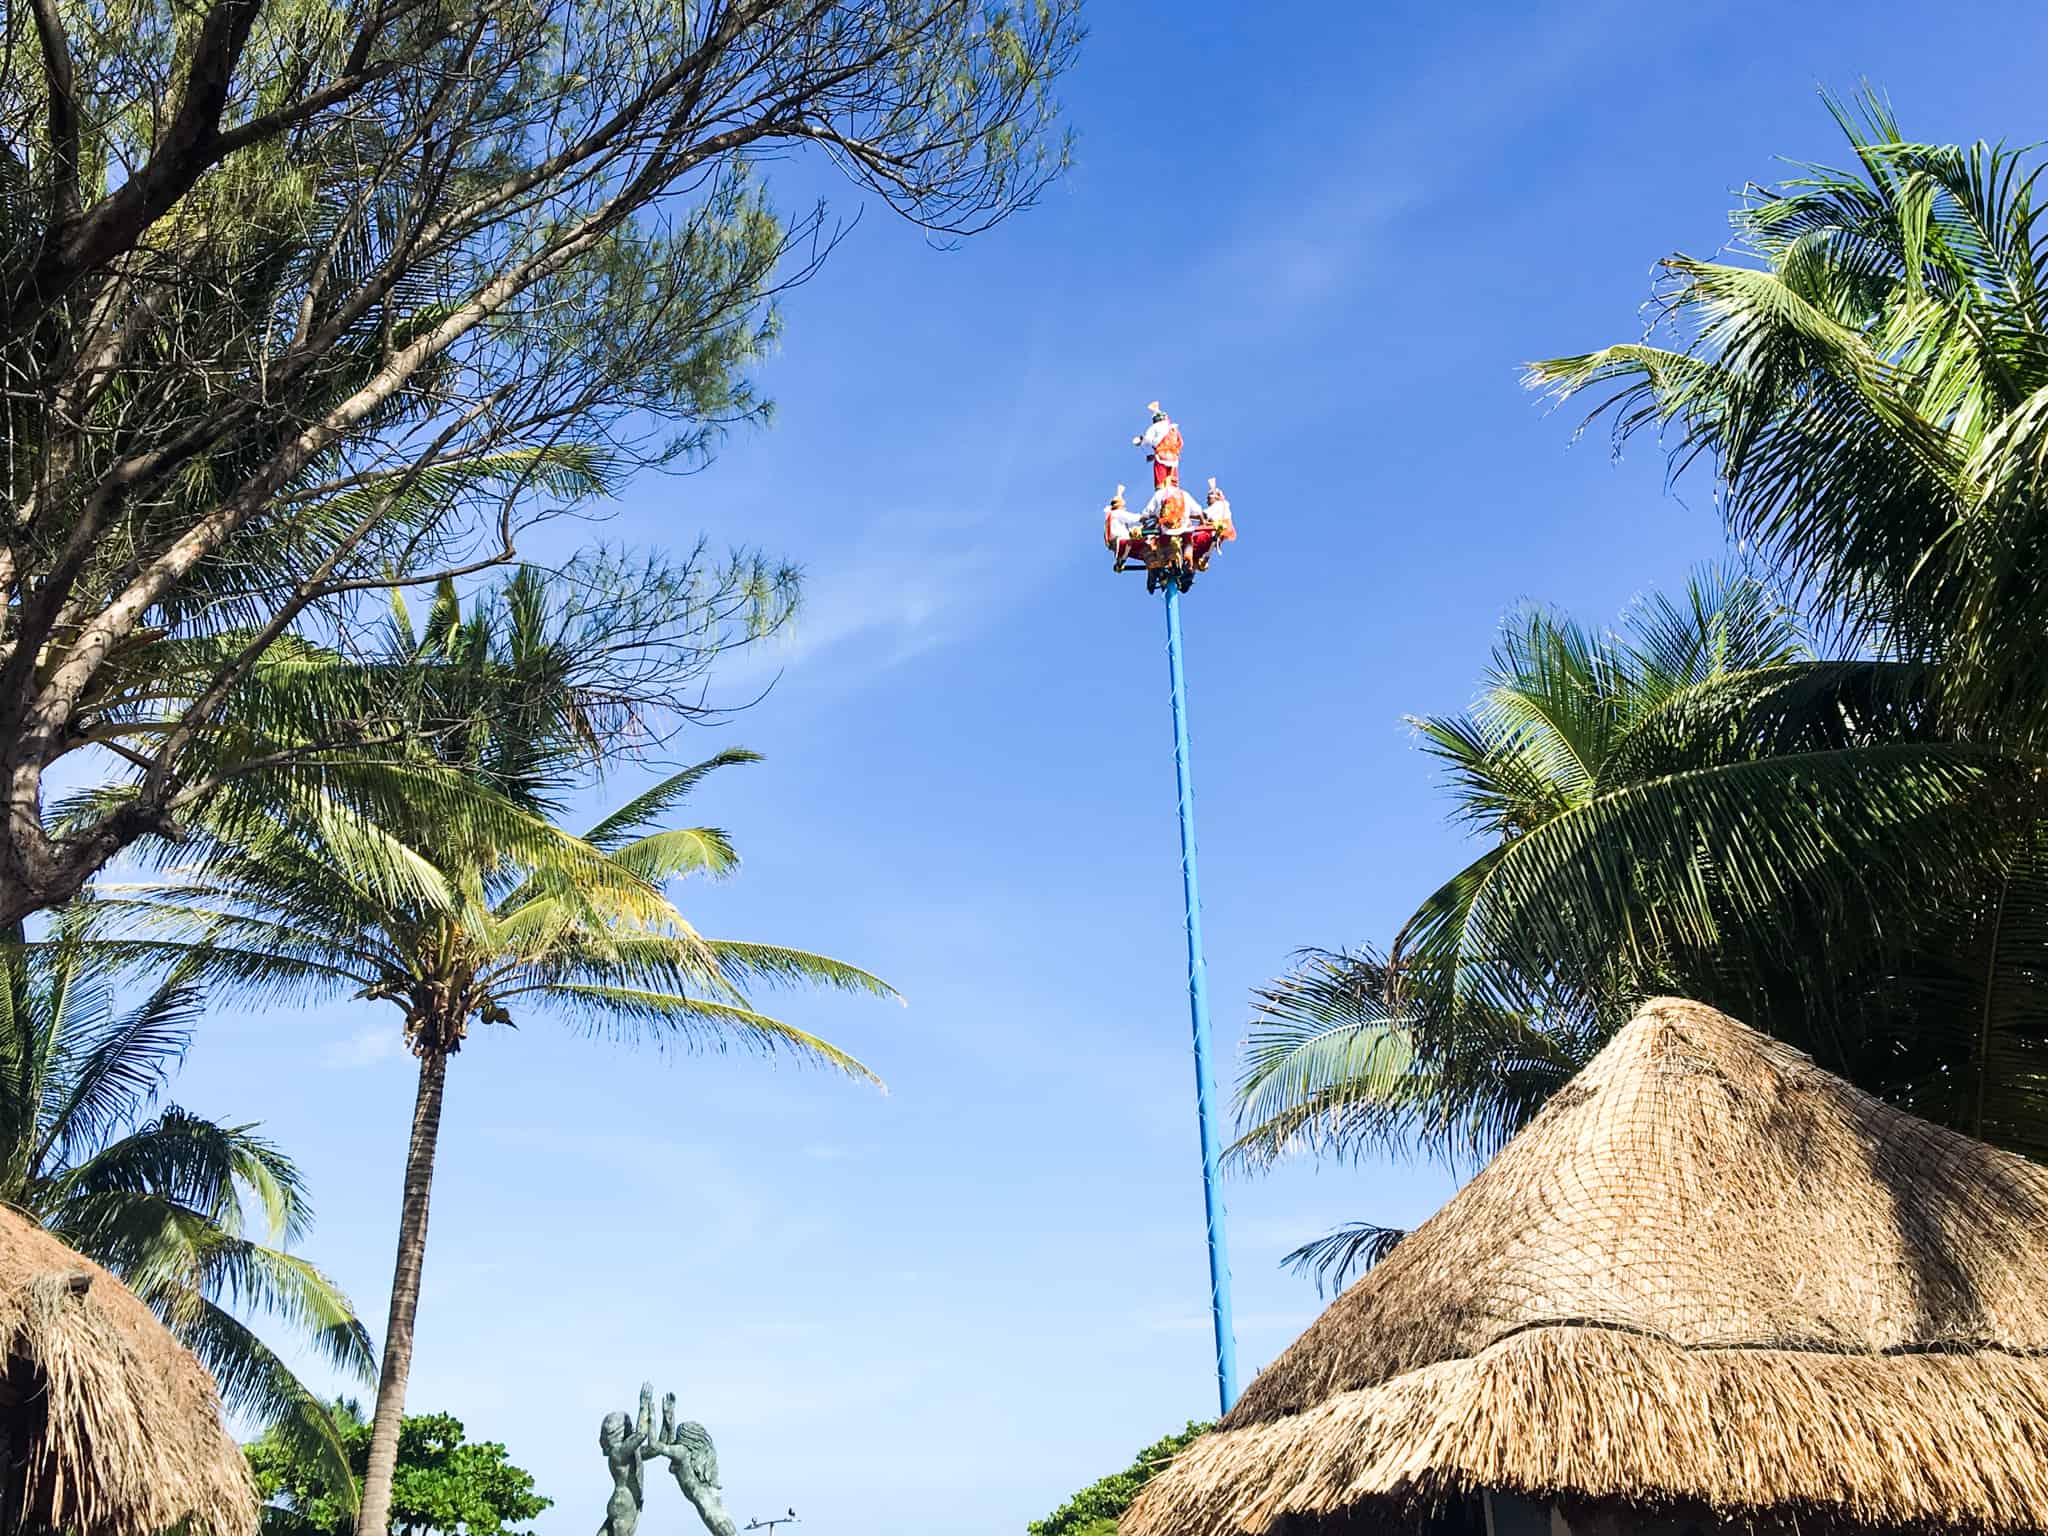 sky performers on a high pole performing in Playa Del Carmen's pier